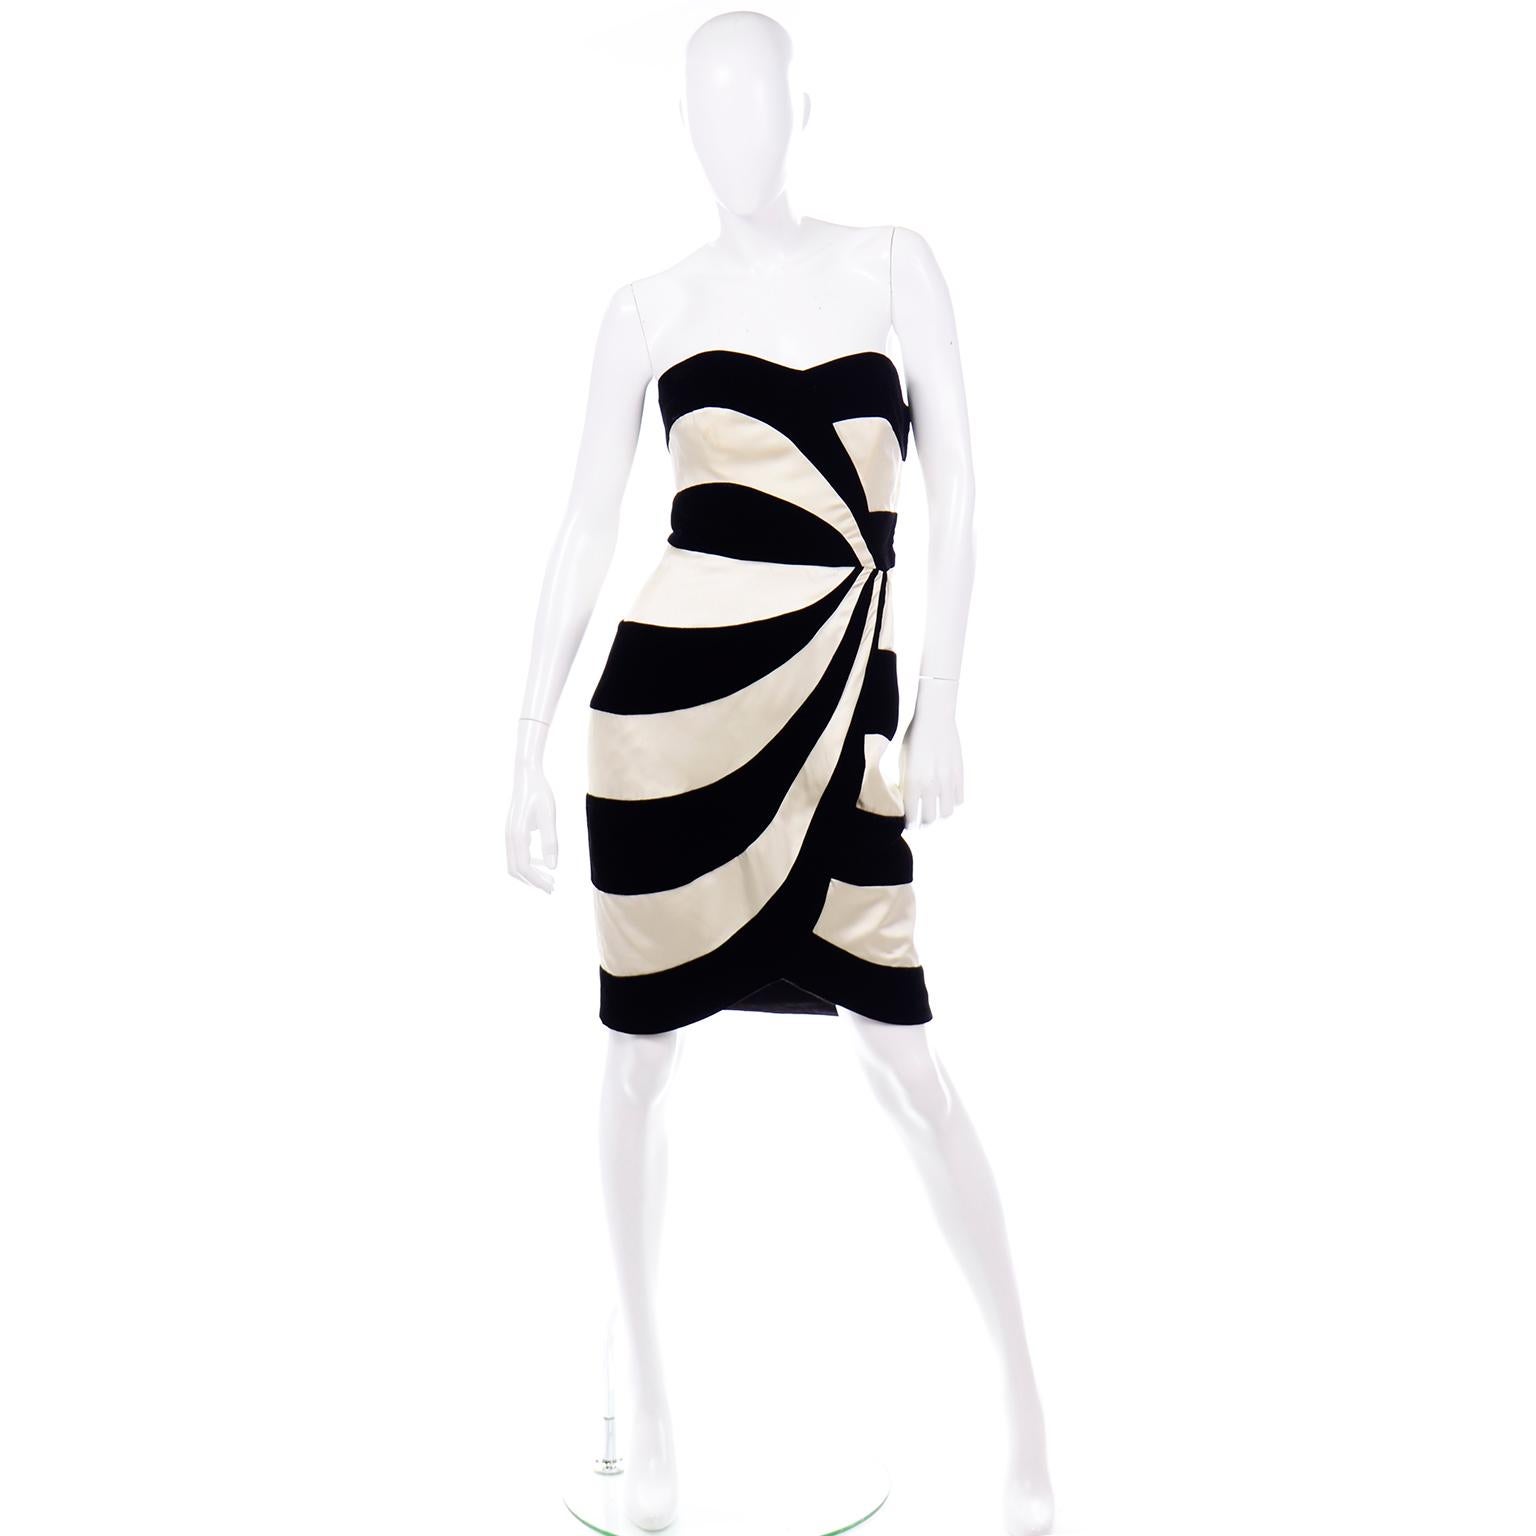 This such a fun and flattering Victor Costa vintage cocktail dress from the 1980's! The strapless evening dress has a sweetheart neckline and alternating thick stripes of black velvet and ivory satin. The waist is nicely fitted and all the stripes